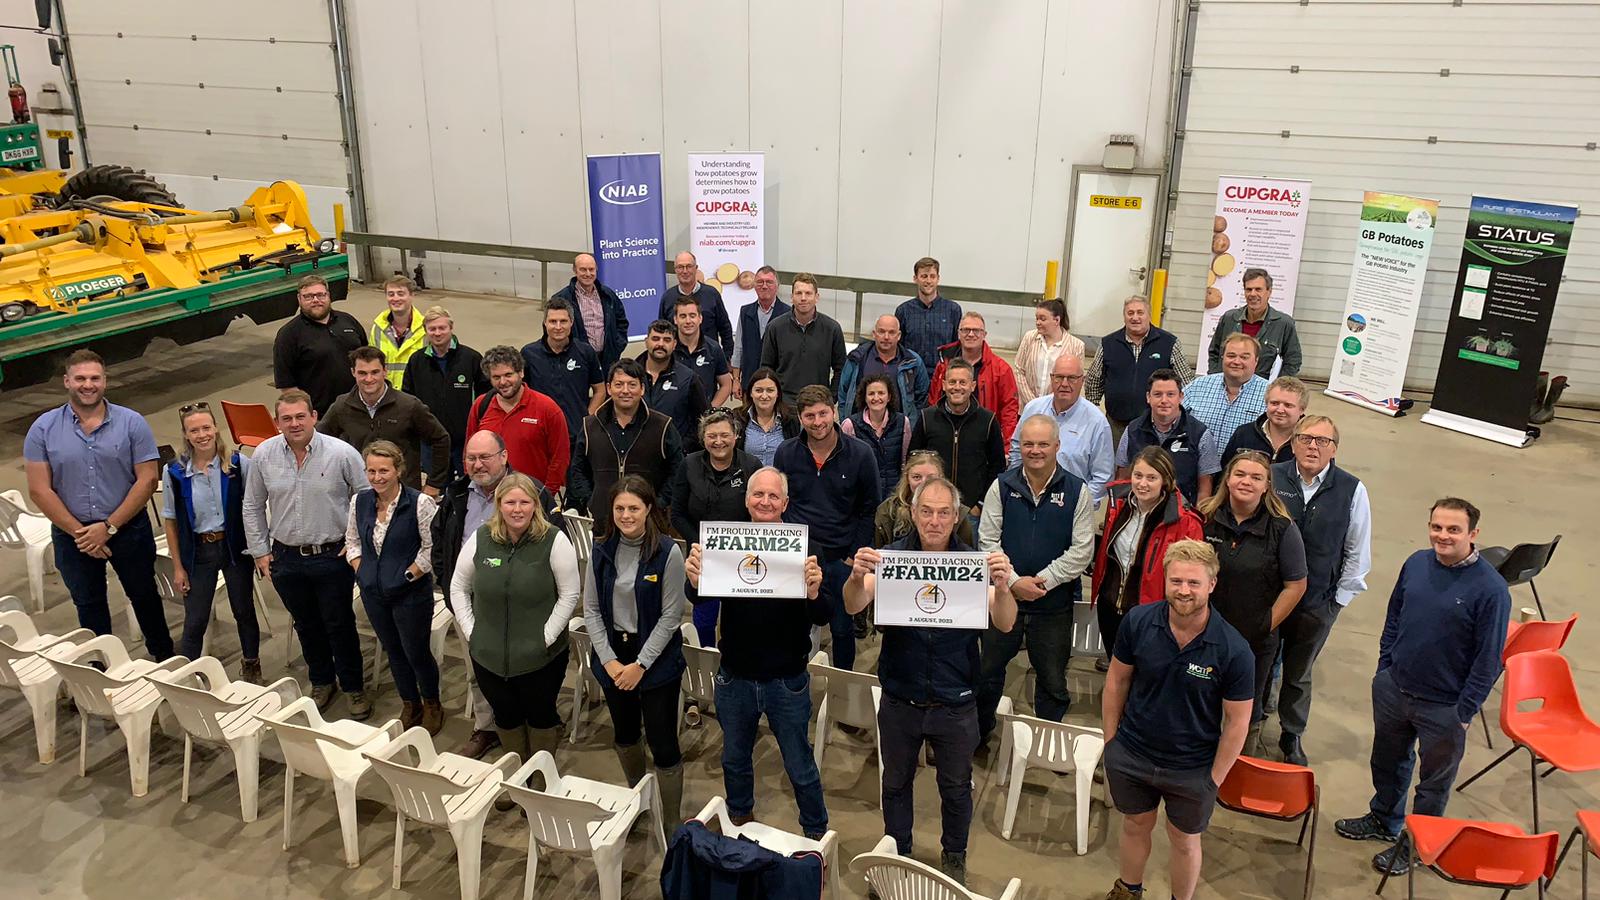 Attendees at NIAB Potato Day showing their support for the #Farm24 campaign